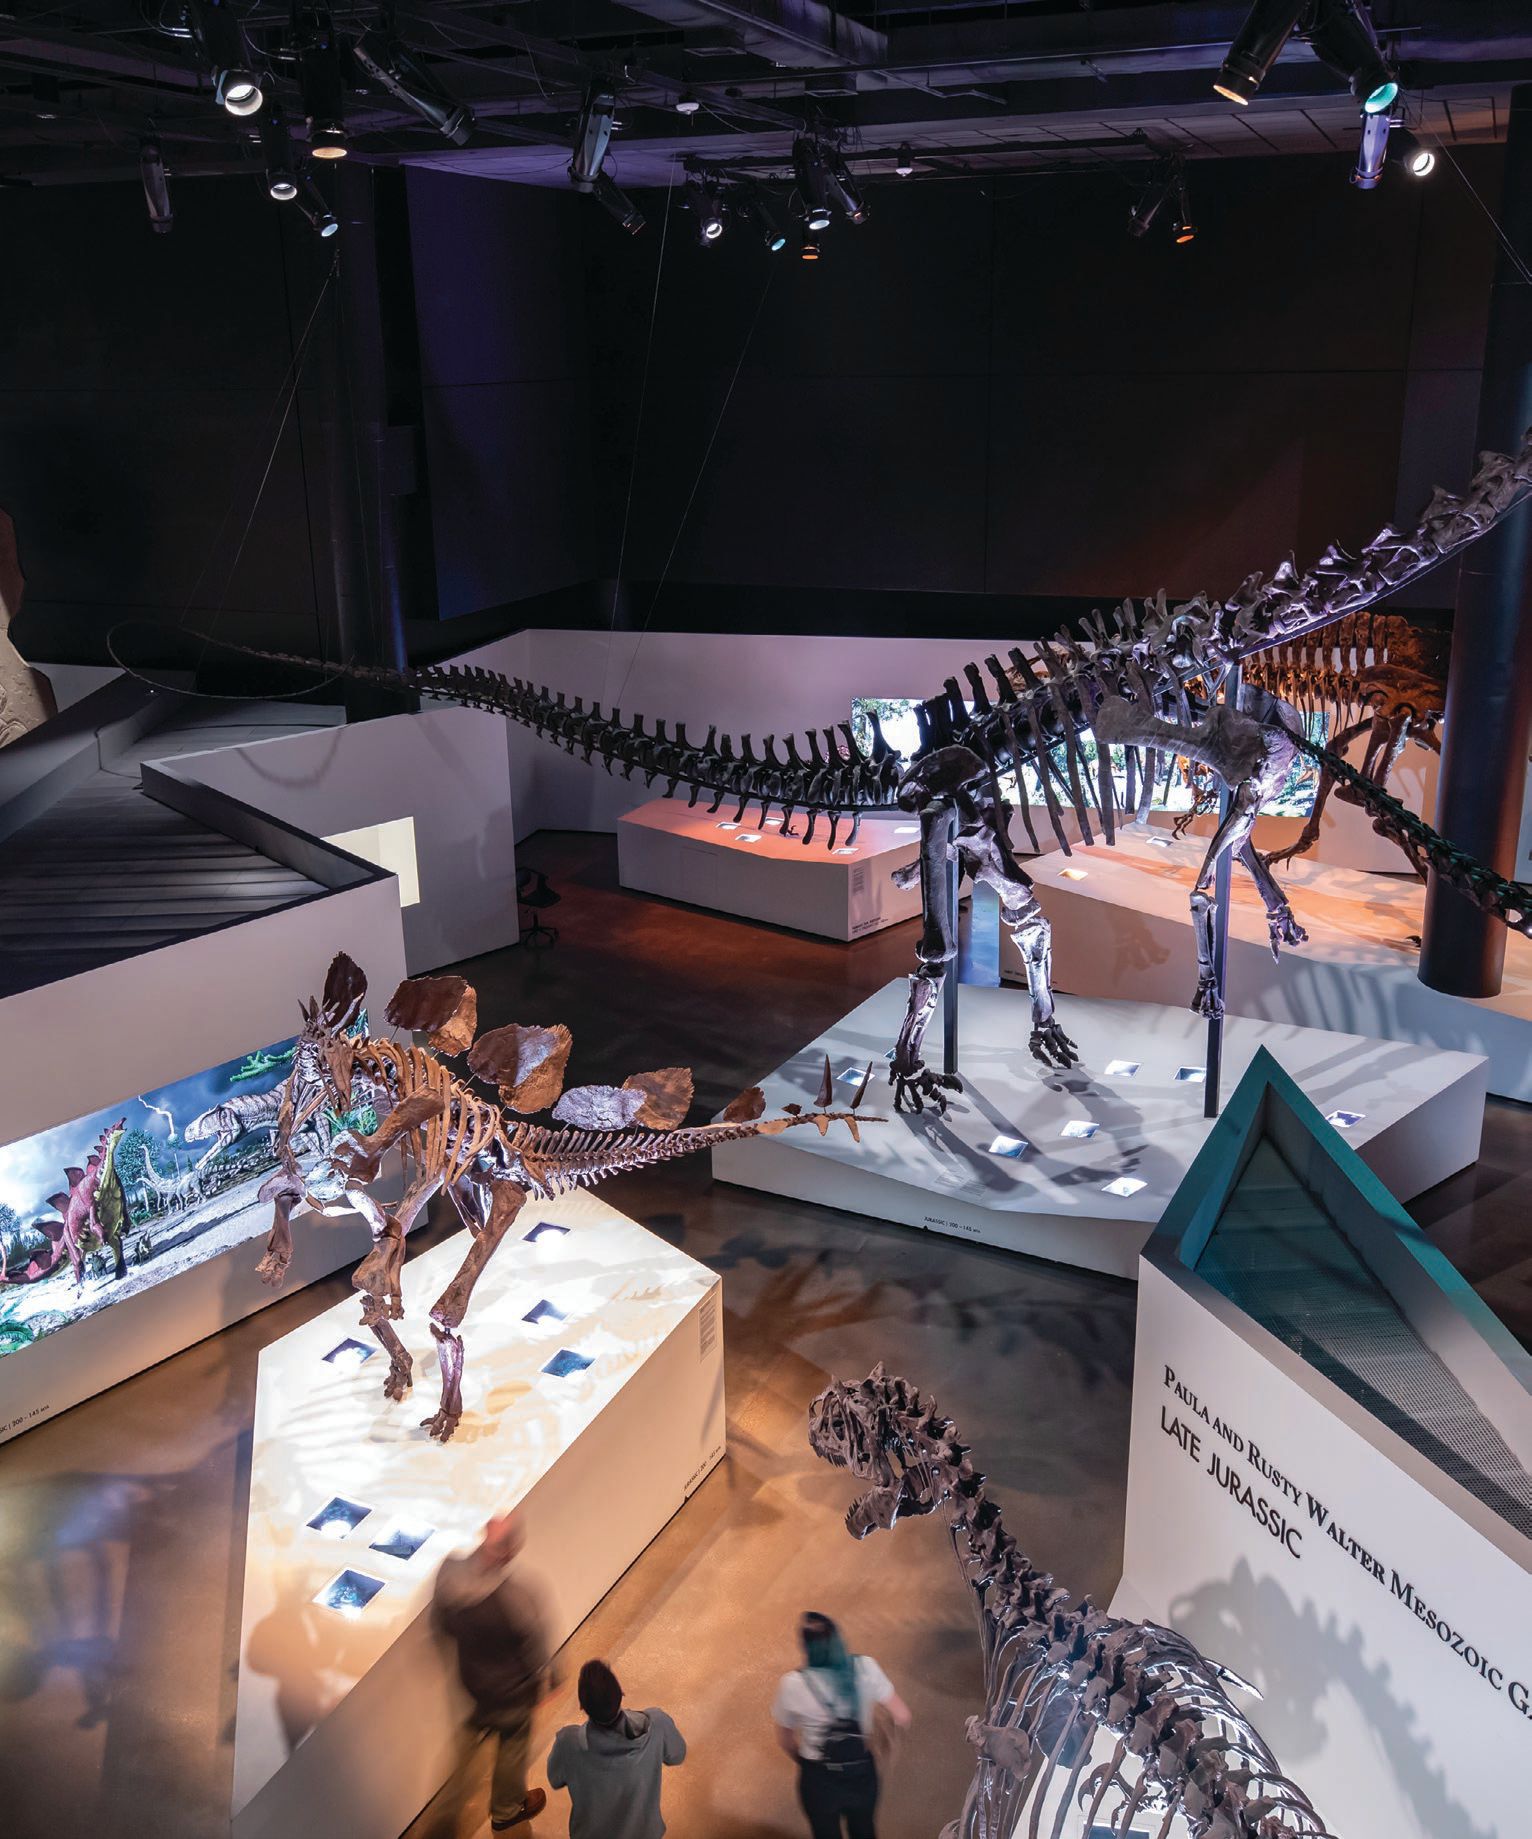 Learn all about extinct dinos at Houston Museum of Natural Science. PHOTO BY MIKE RATHKE/COURTESY OF HOUSTON MUSEUM OF NATURAL SCIENCE